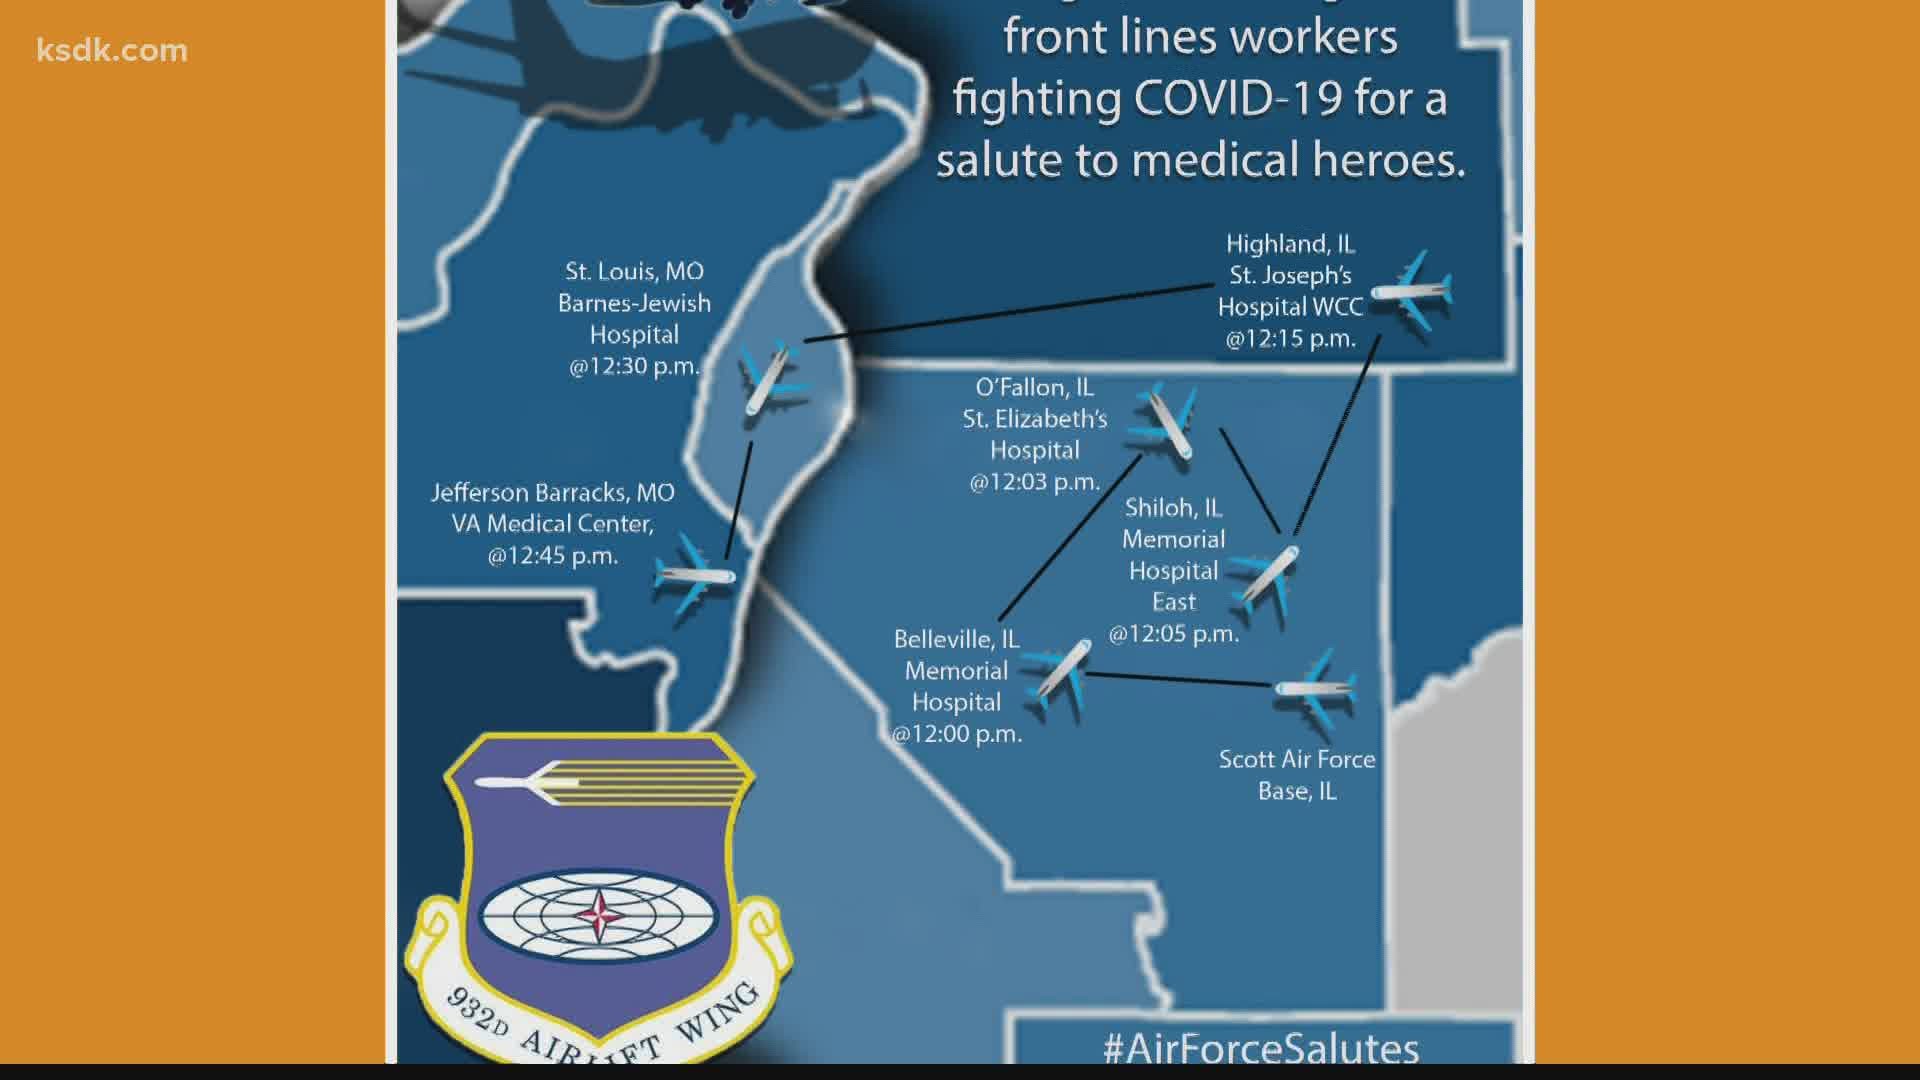 The flyover will be a salute to health care workers